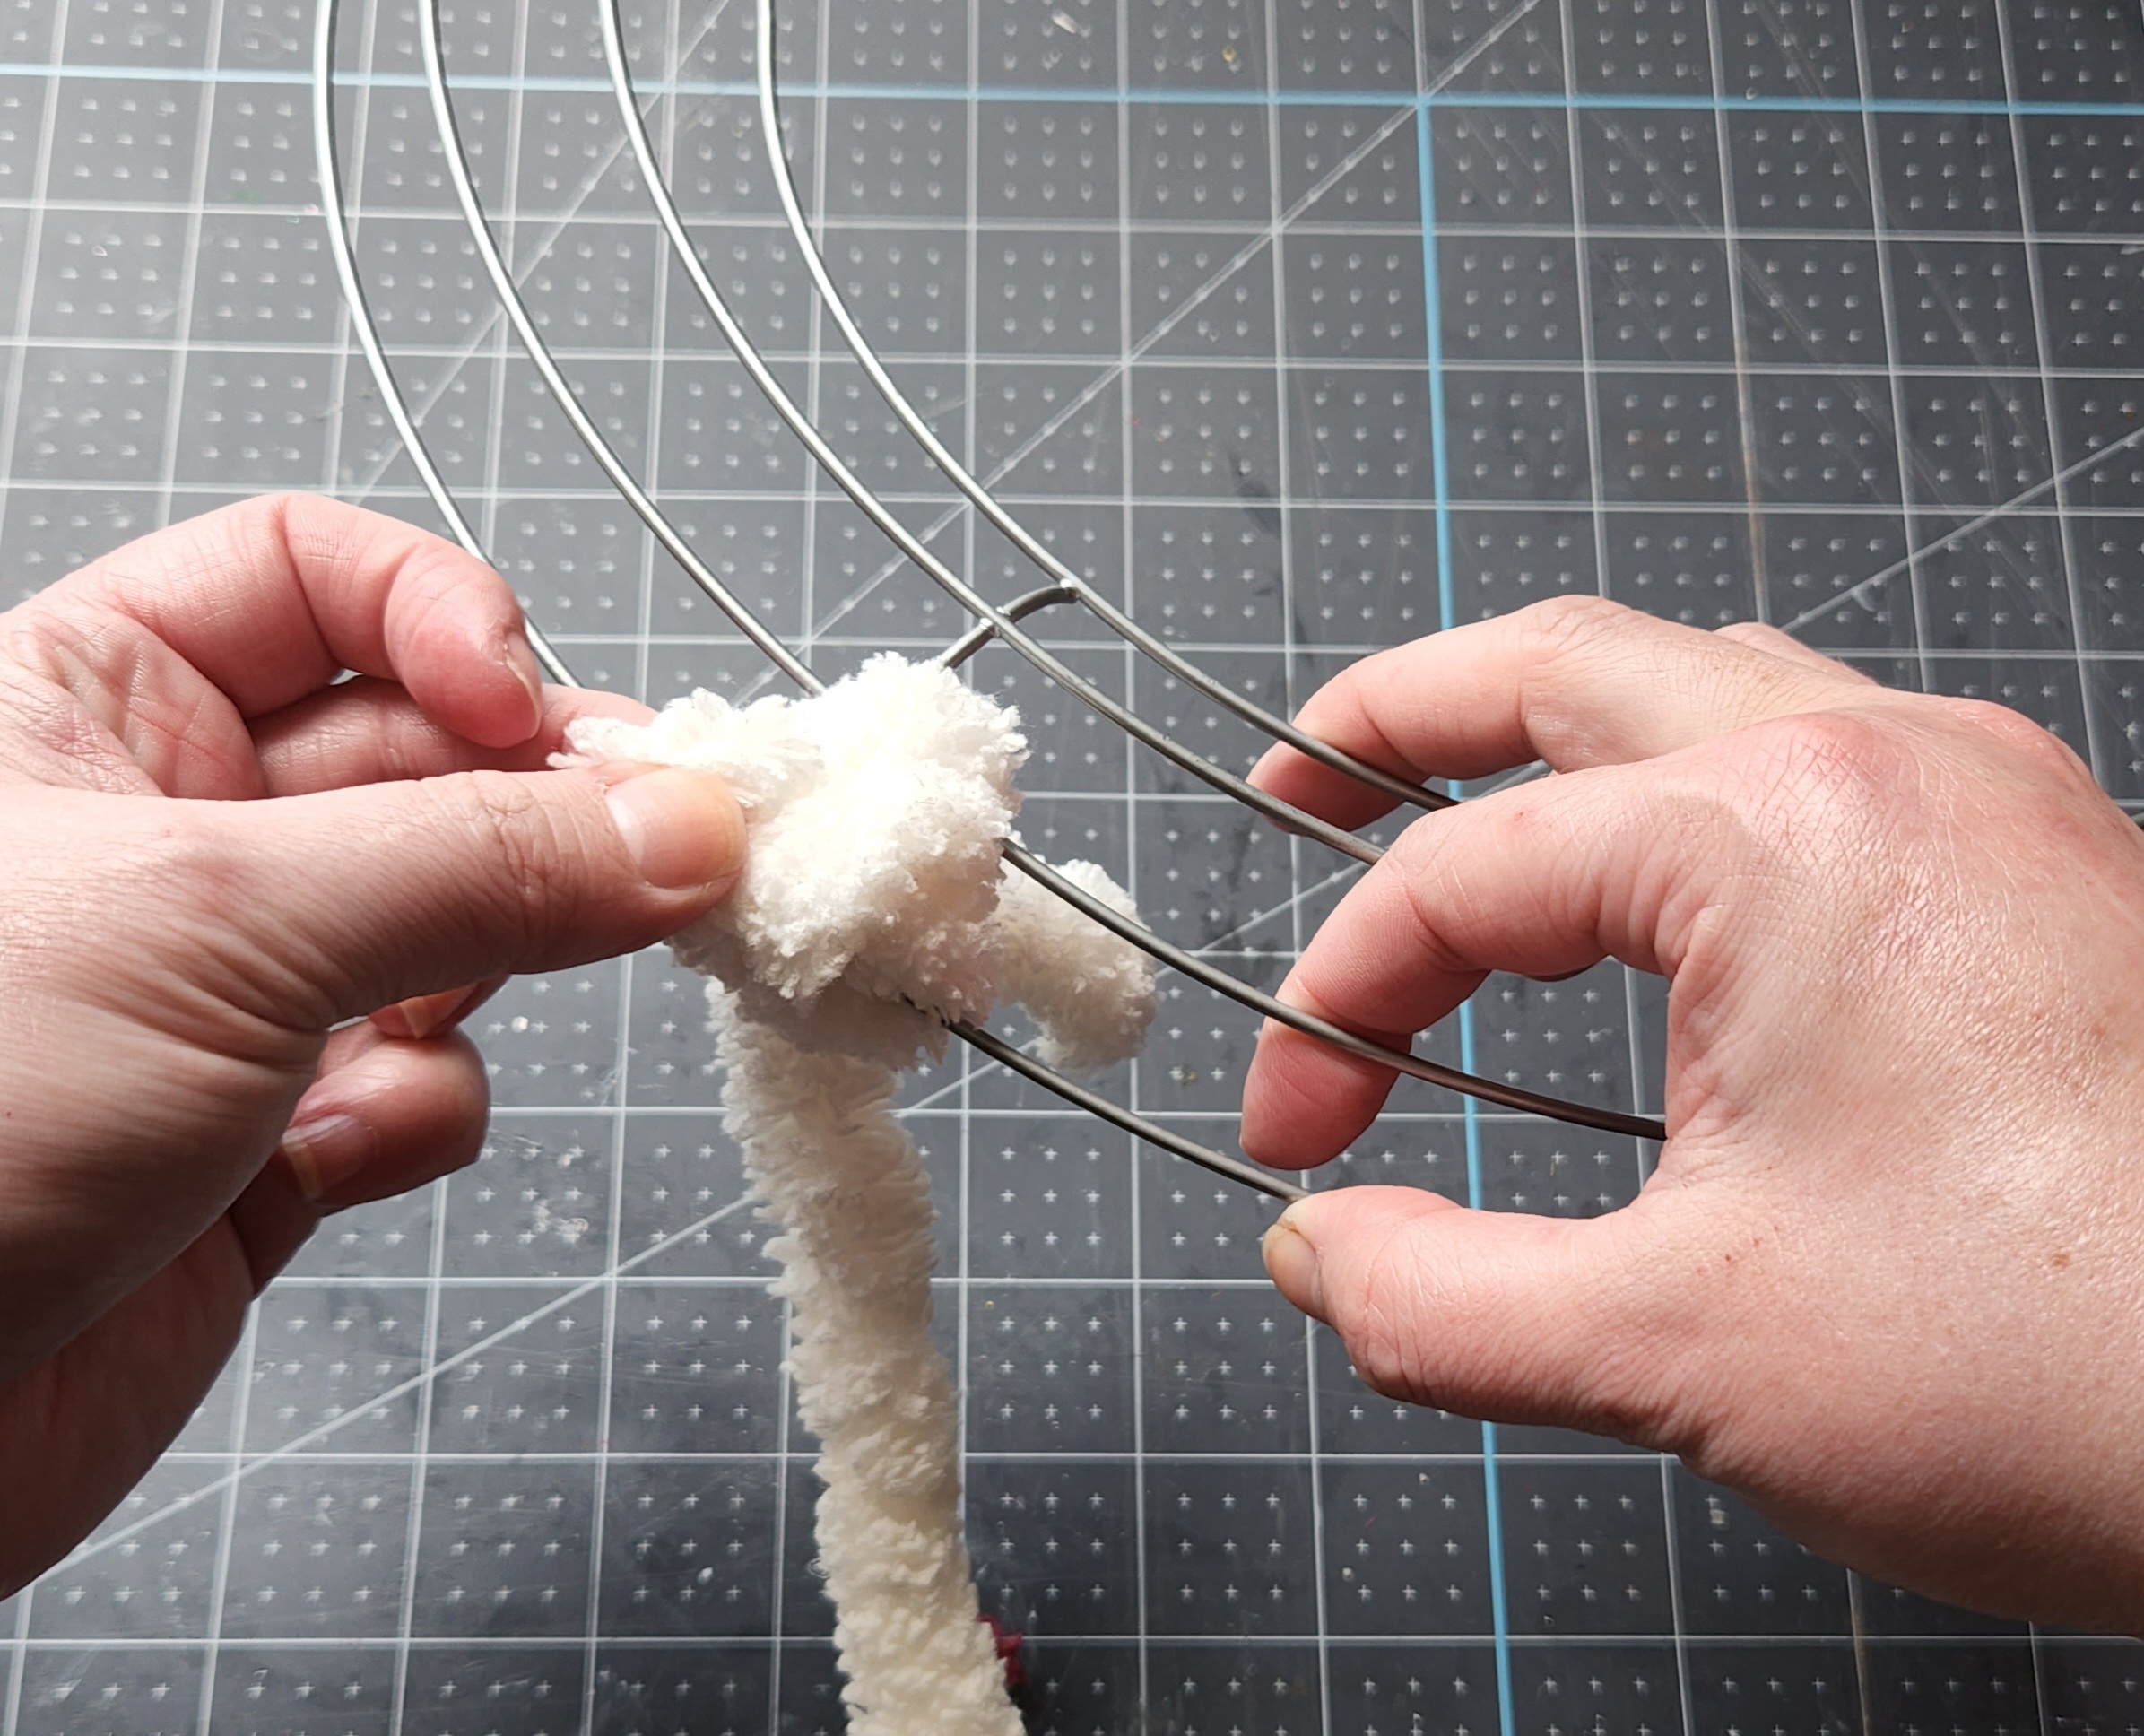 Tying a slip knot around the outer two rings of the wreath form with the cream yarn.